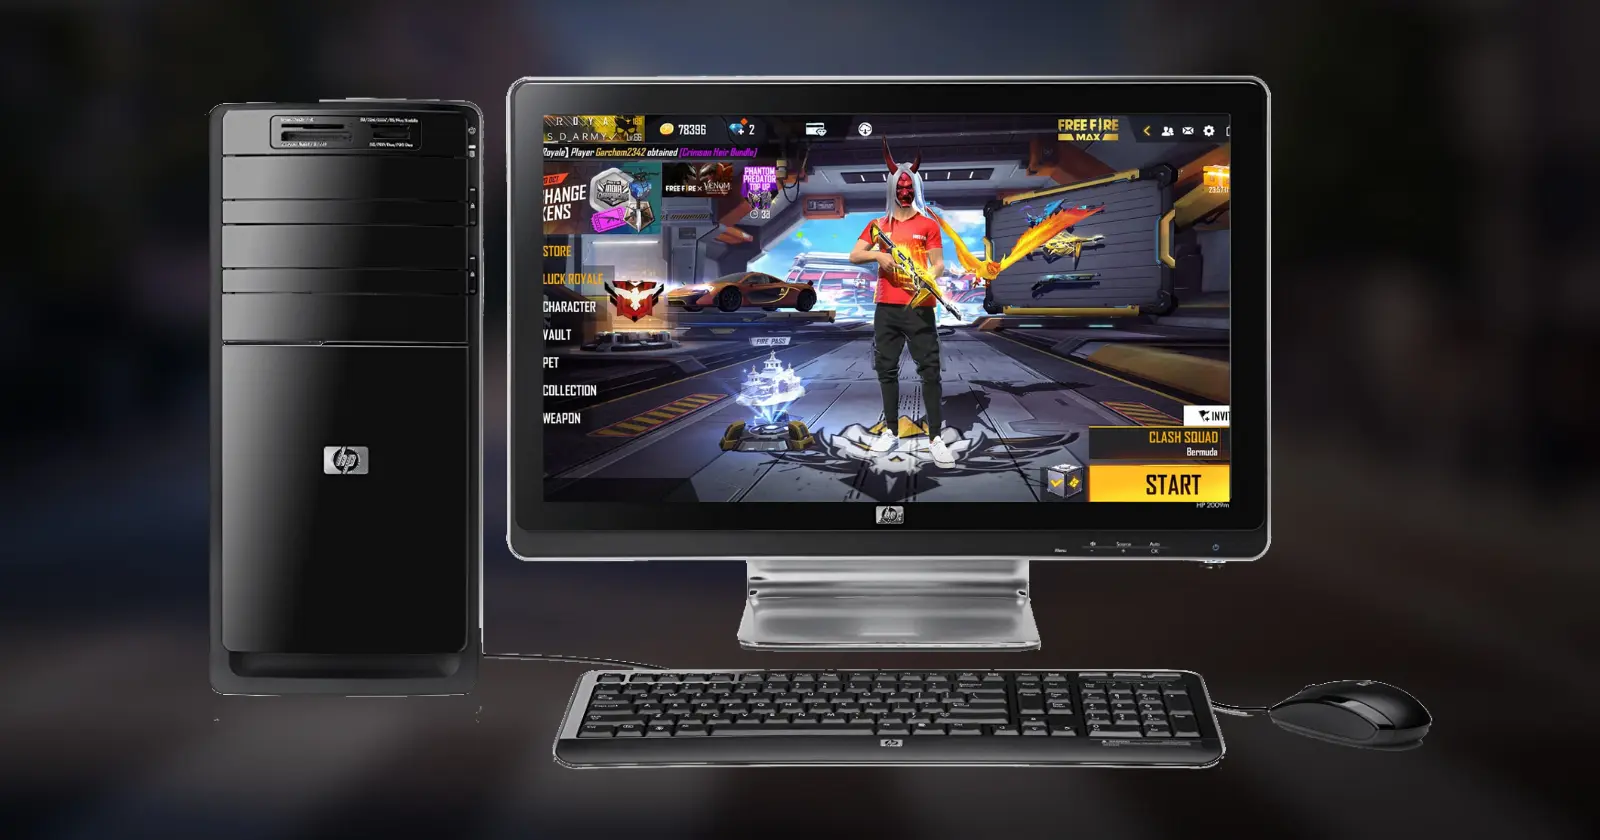 Free Fire PC gaming setup featuring an in-game character displayed on the monitor for an immersive gaming experience.